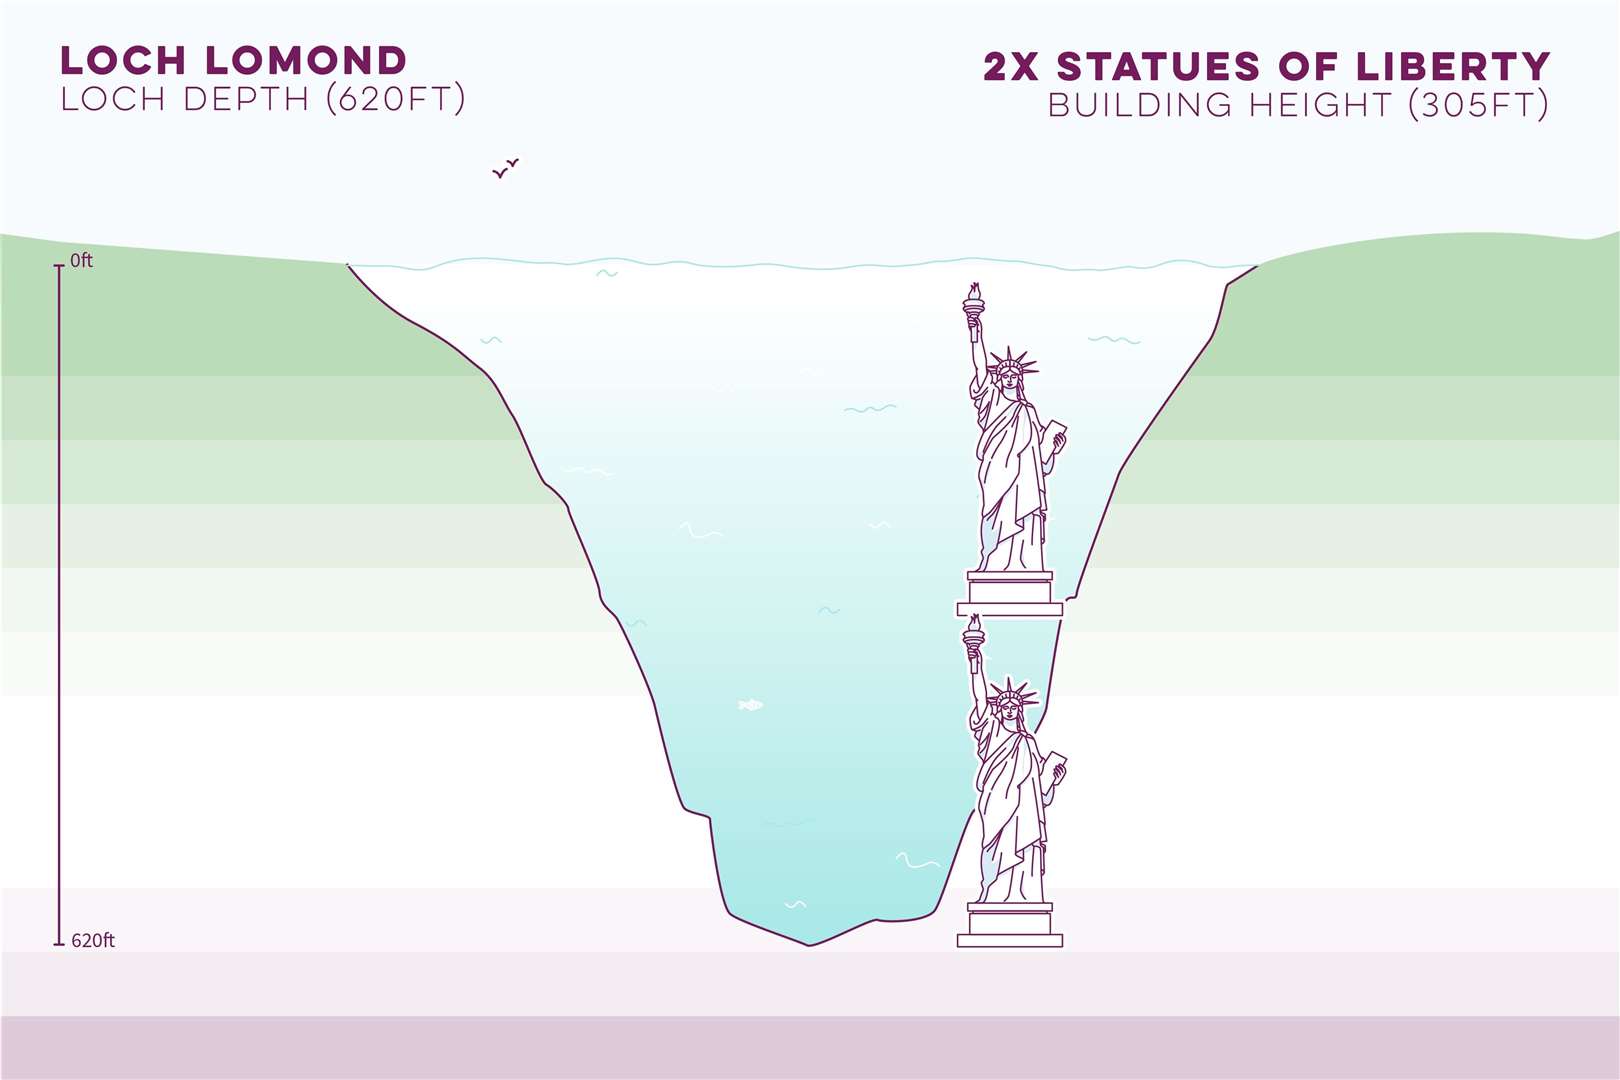 Loch Lomond is the same depth as more than two Statue of Liberty monuments stacked on top of each other.